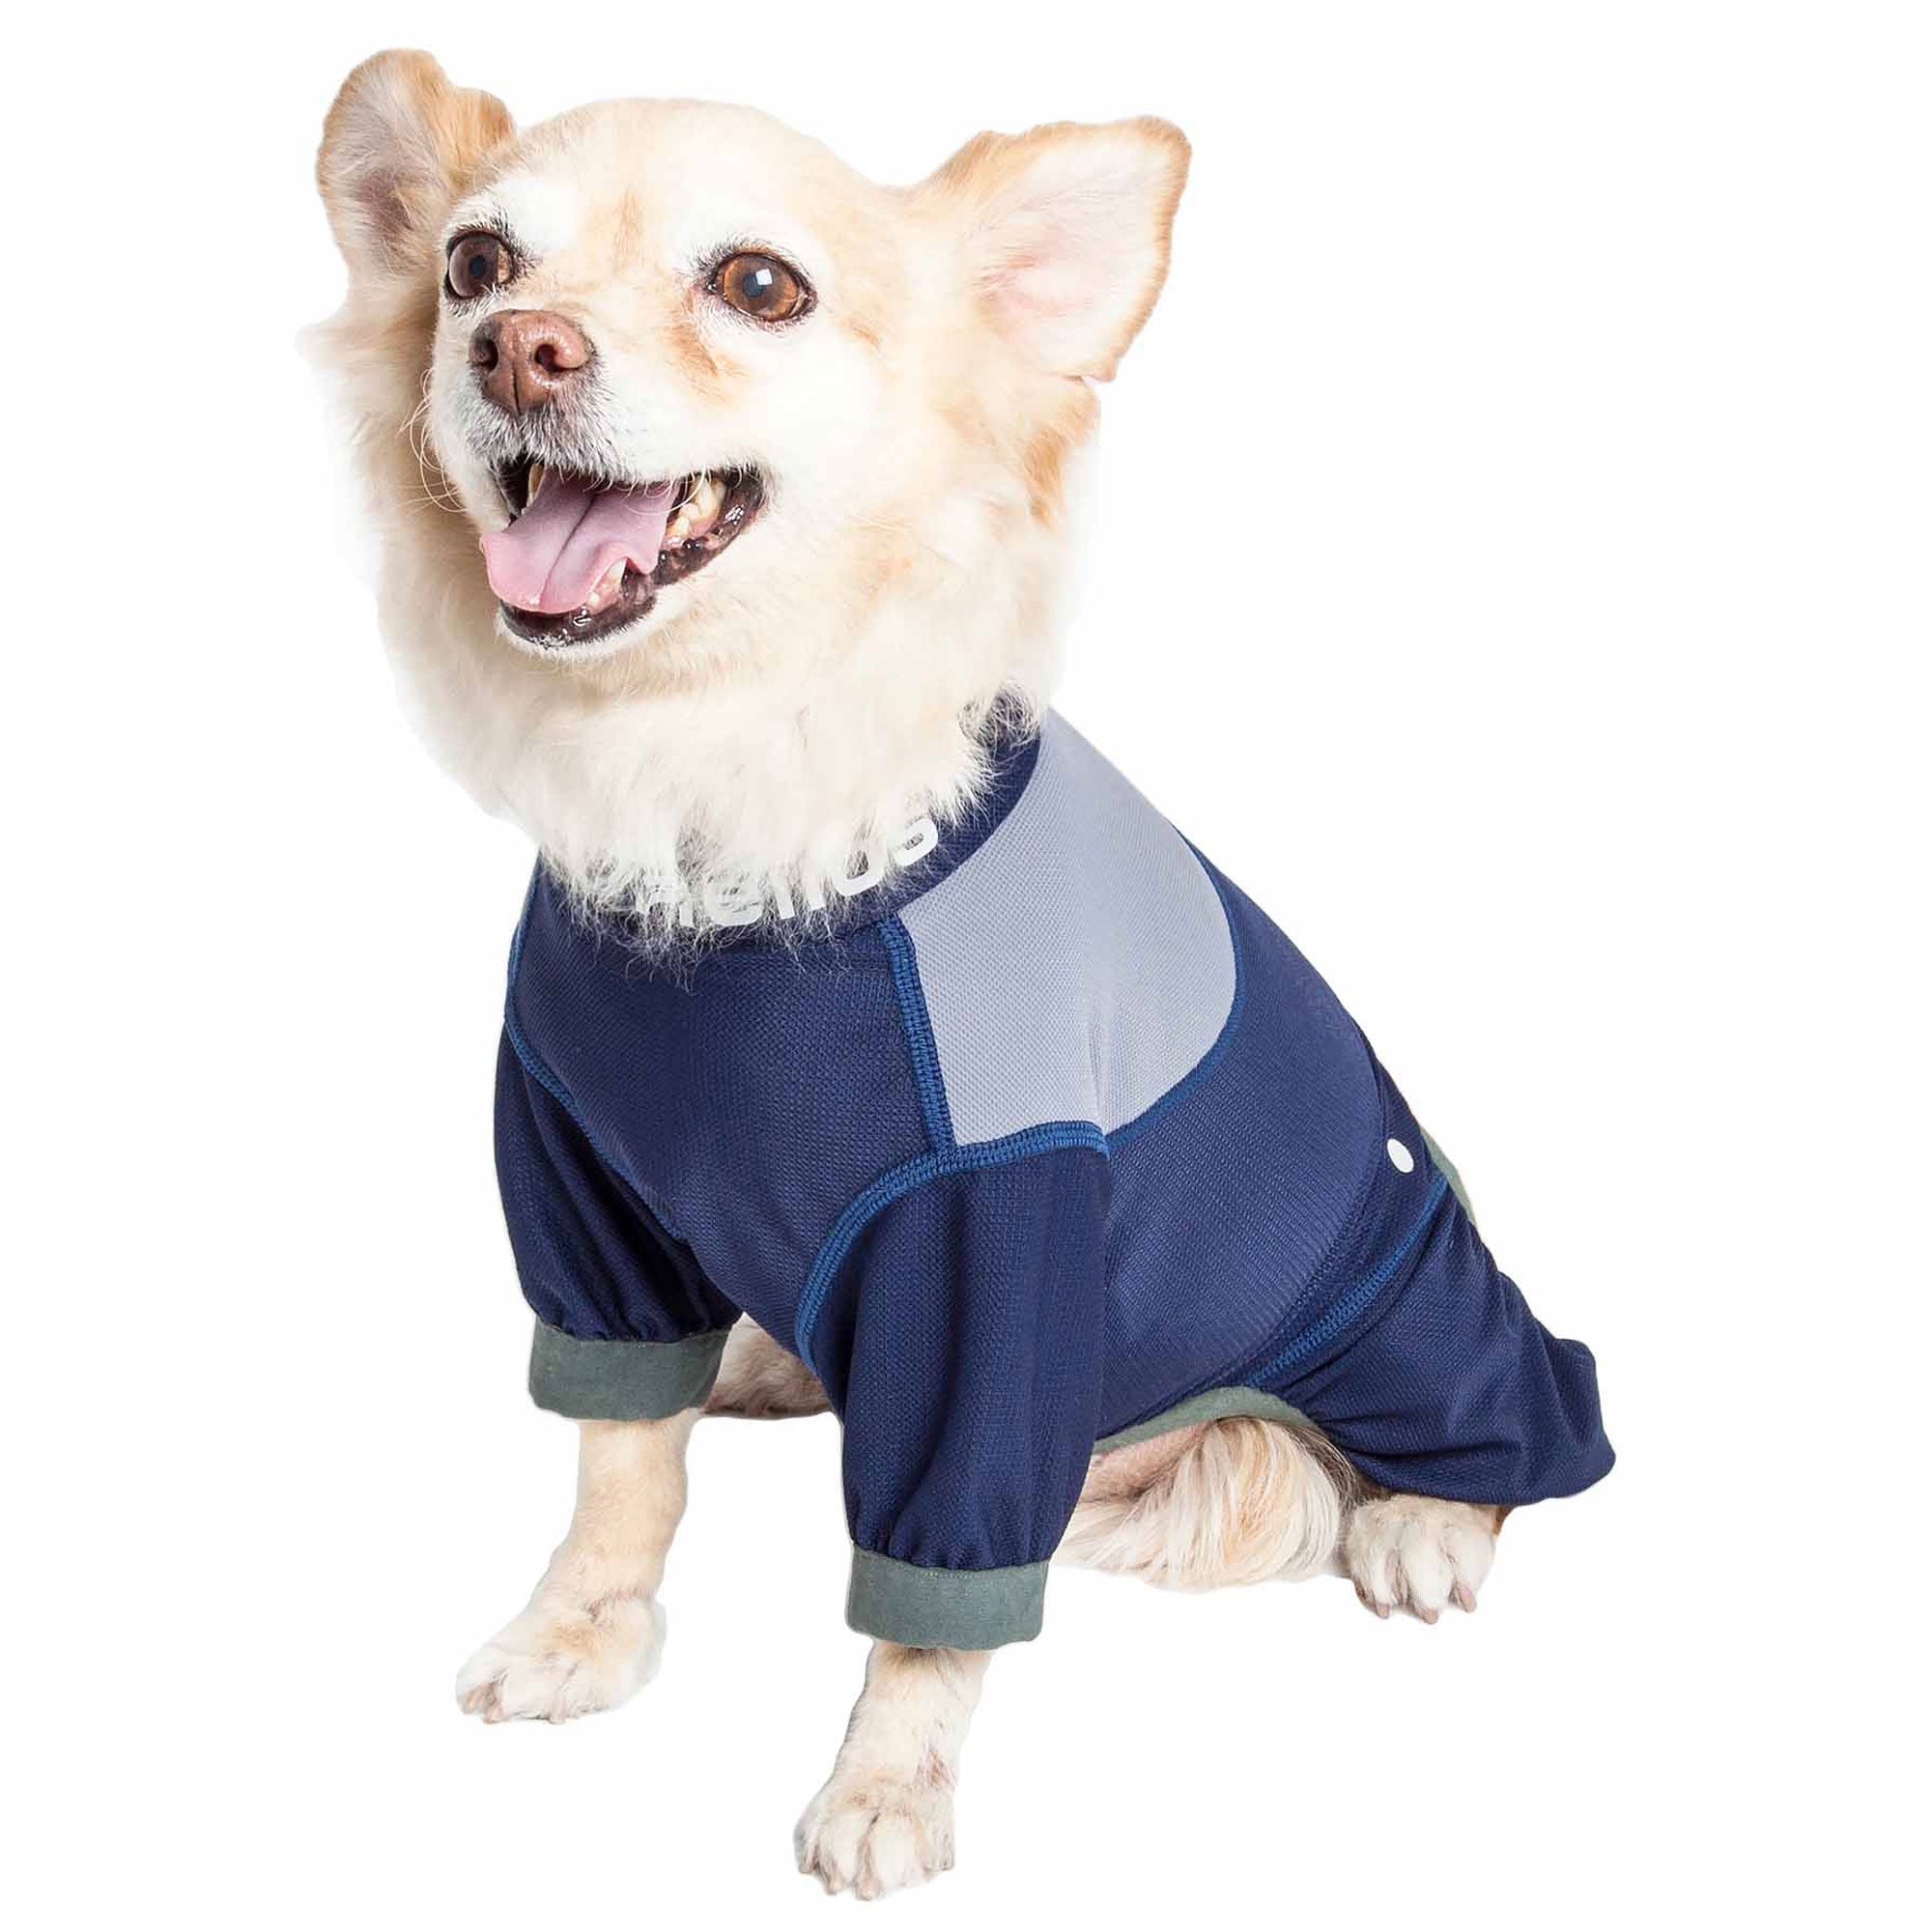 Dog Helios® Tail Runner Dog Track Suit - Gray - Small